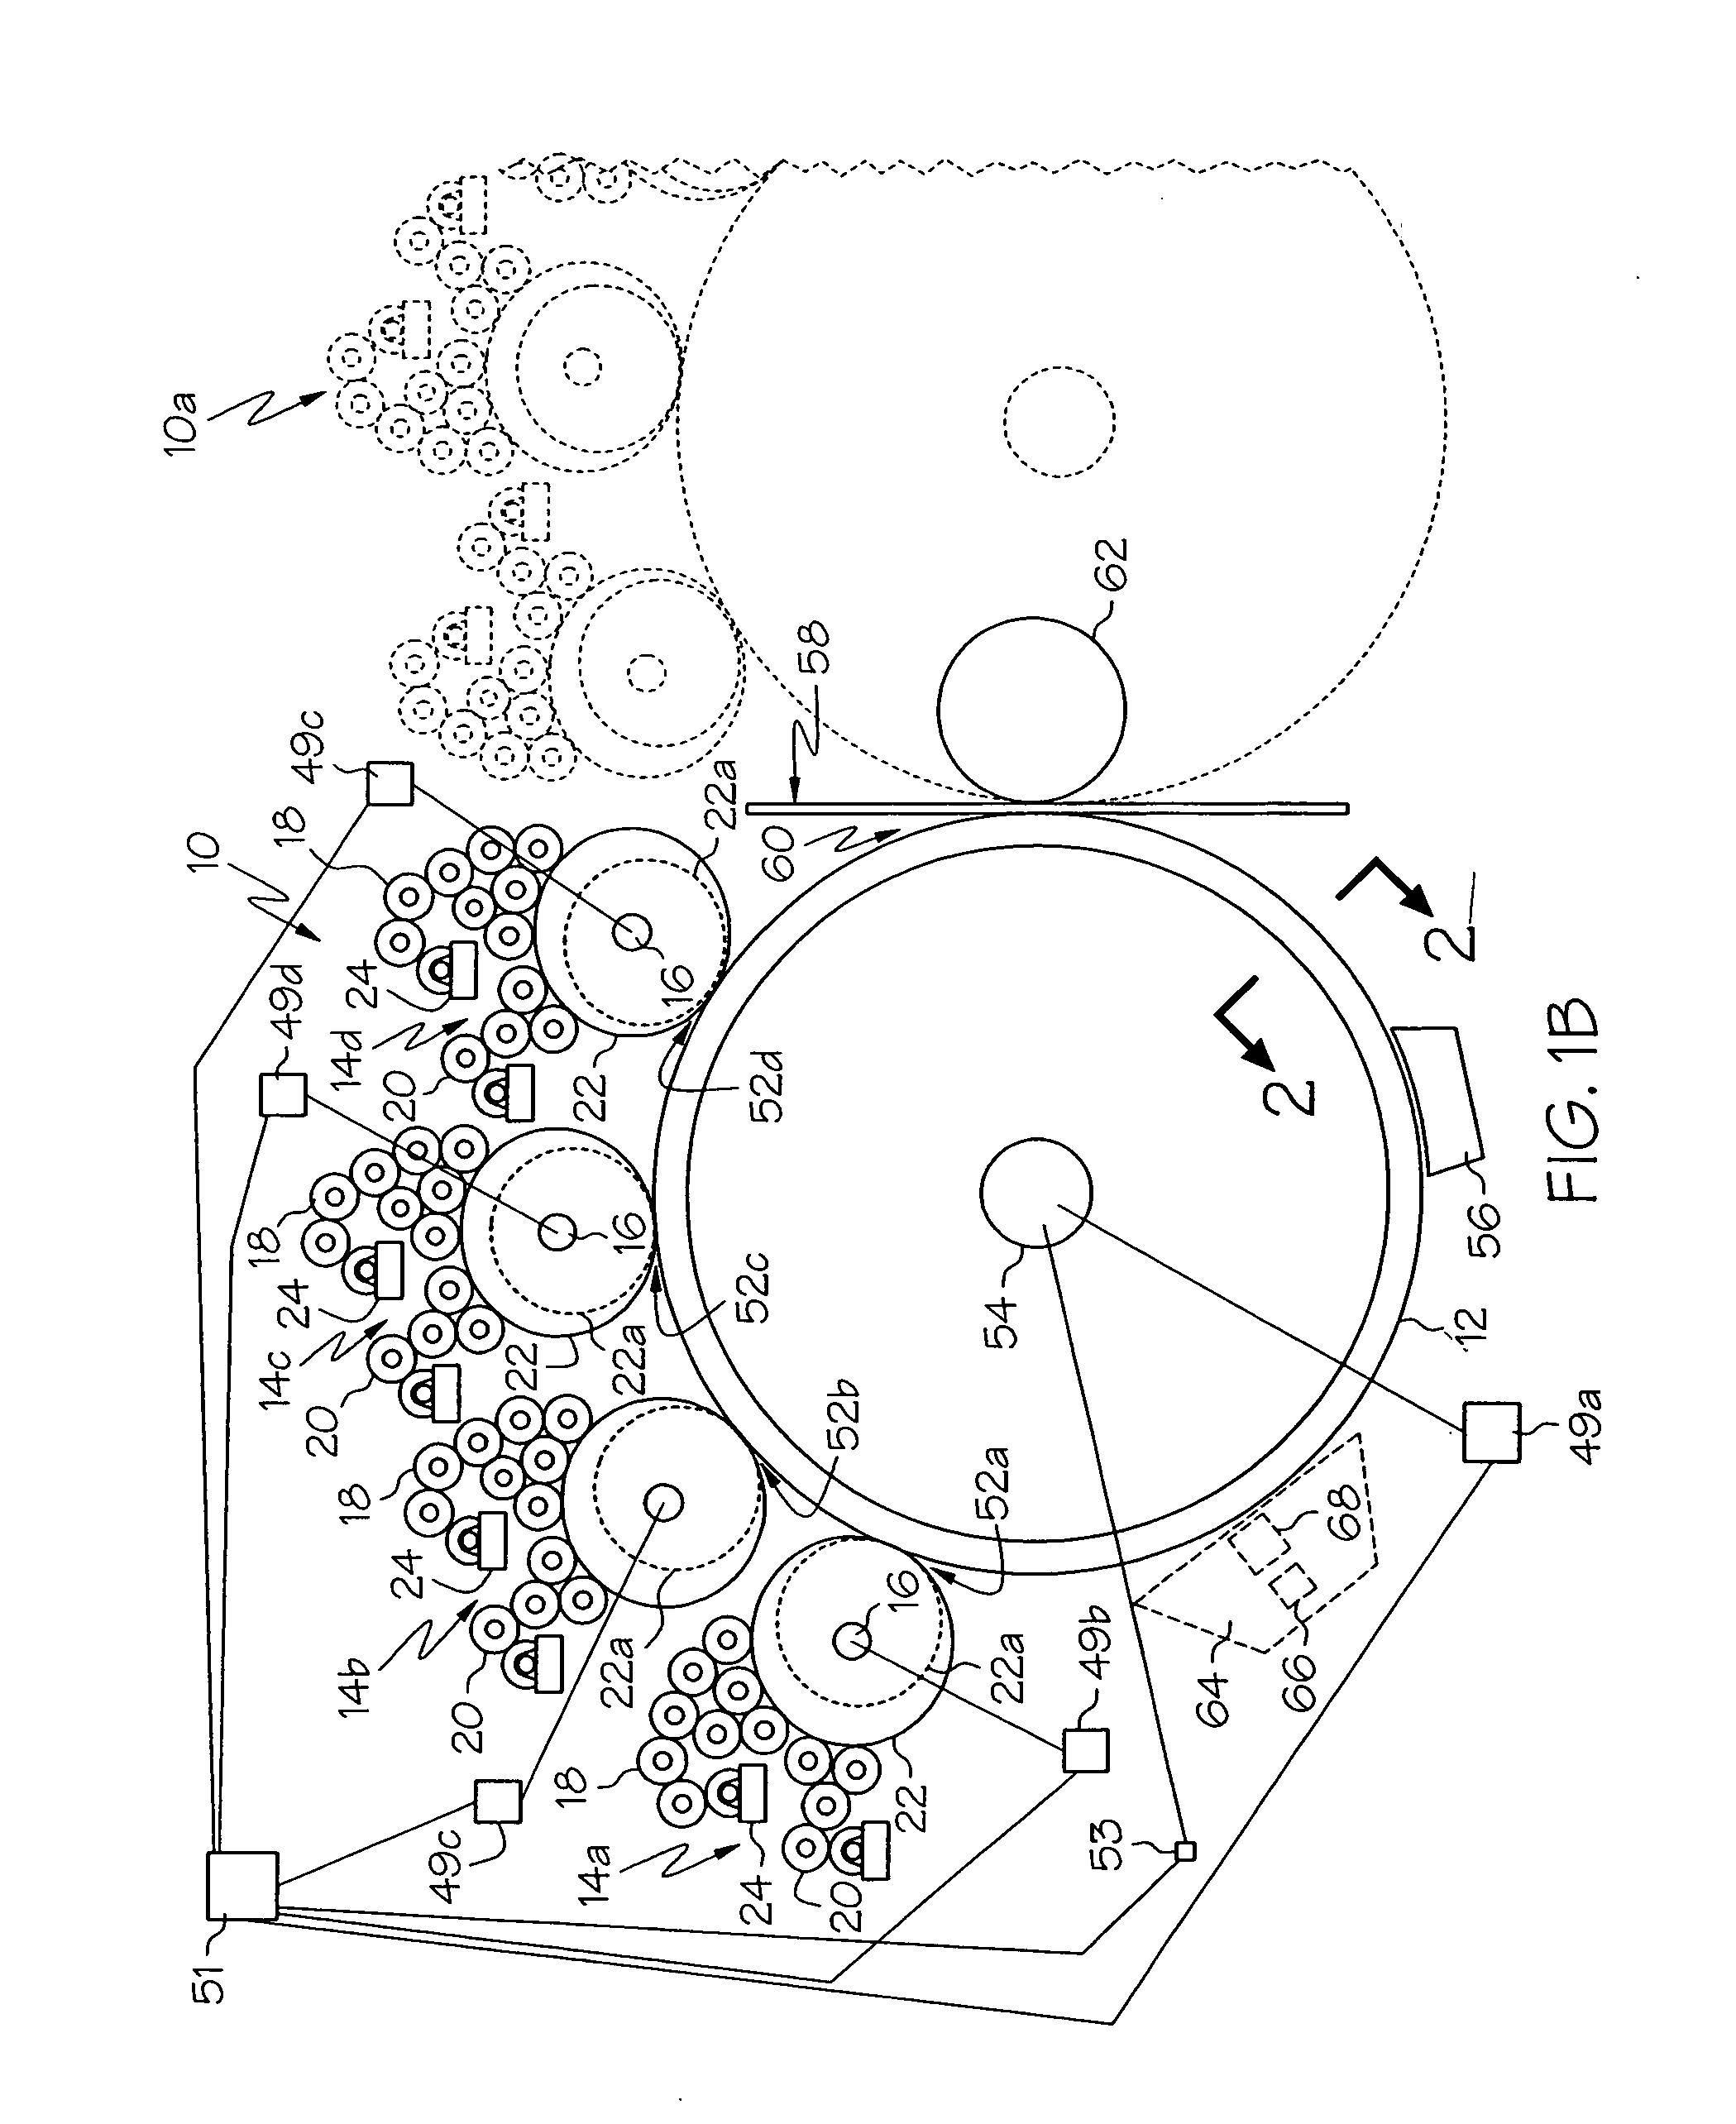 Variable cut-off offset press system and method of operation